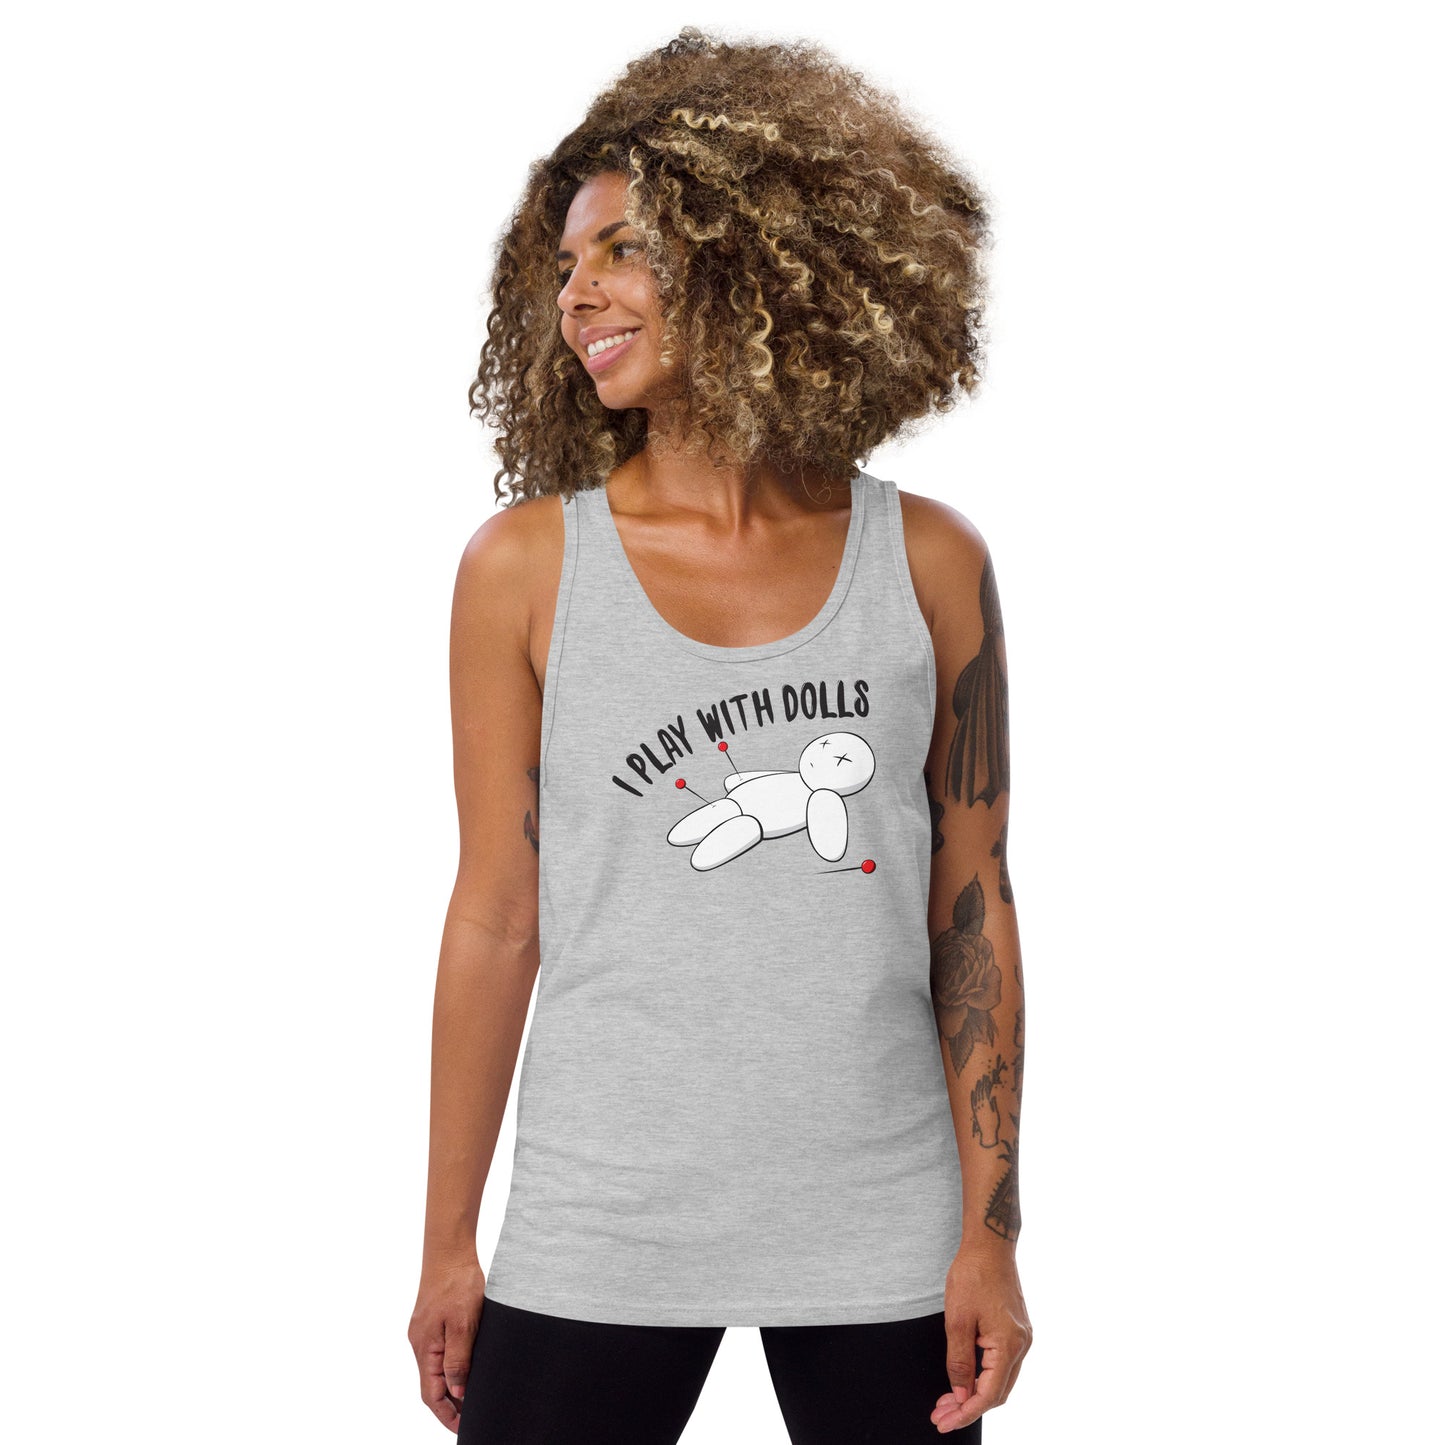 Model wearing Athletic Heather unisex tank top with graphic of white voodoo doll with Xs for eyes stuck with several pins and text "I PLAY WITH DOLLS"